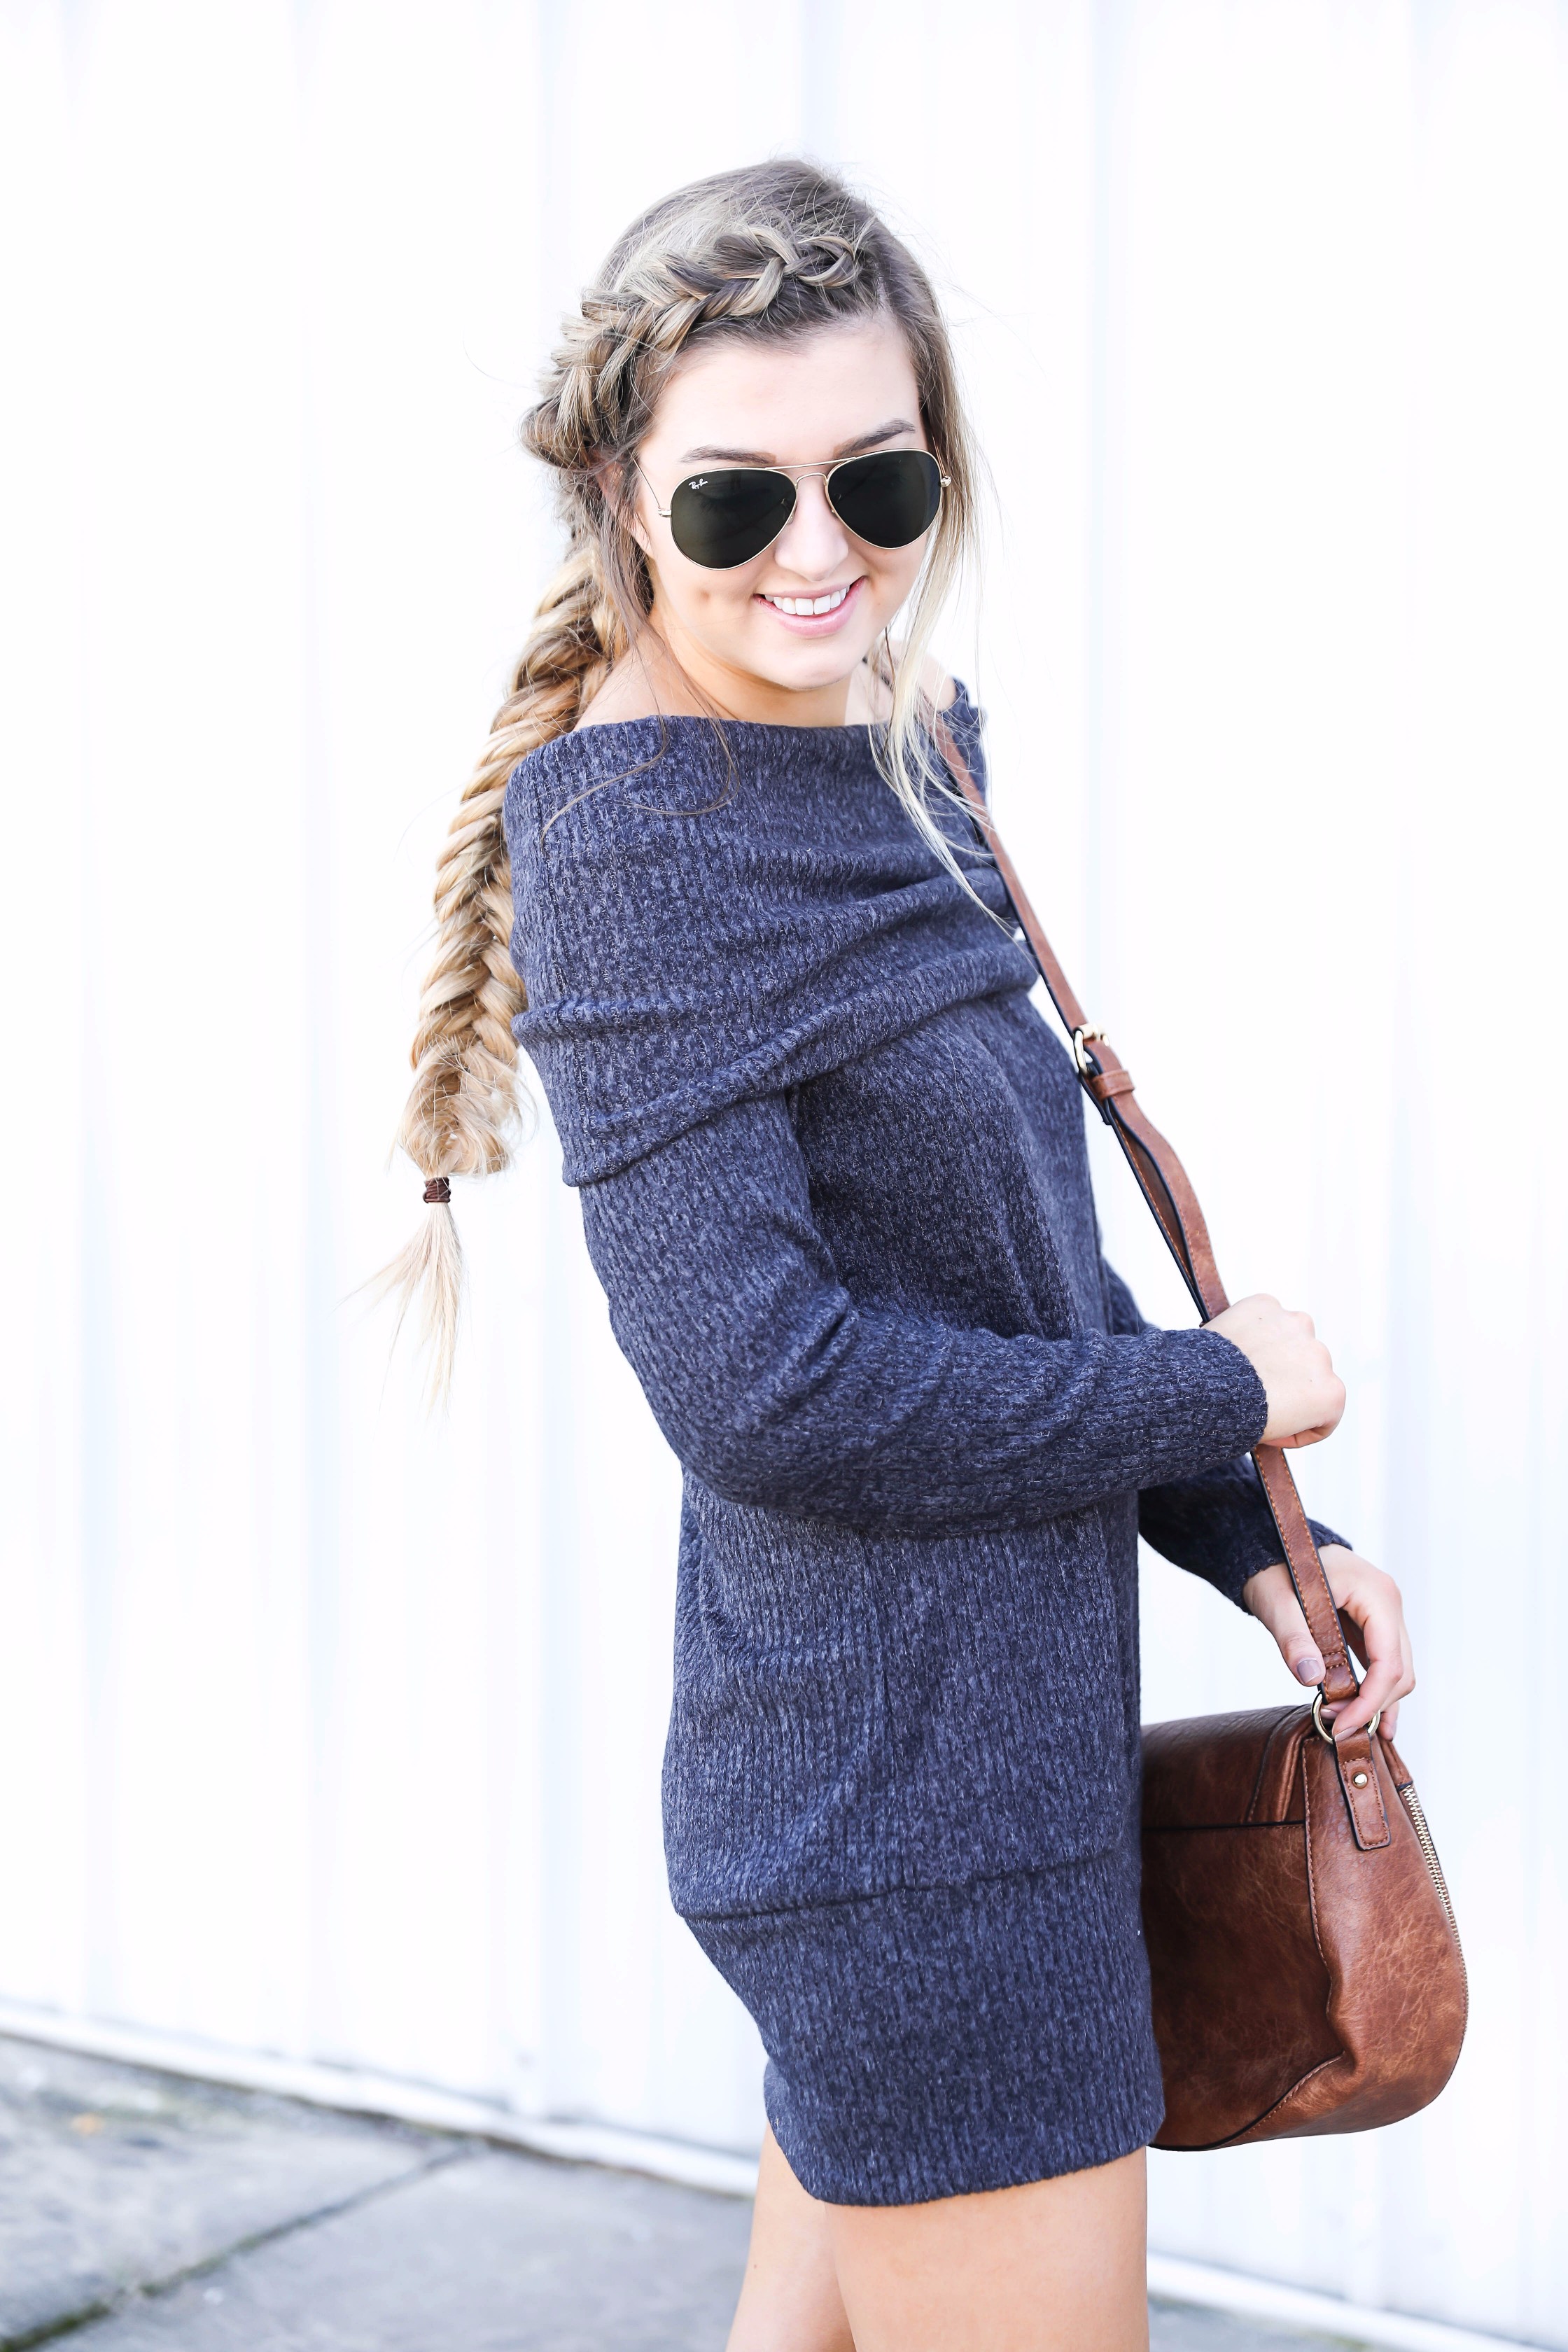 Off the shoulder sweater dress from BooHoo! Seriously the softest sweater ever! Get the details on fashion blog daily dose of charm by lauren lindmark